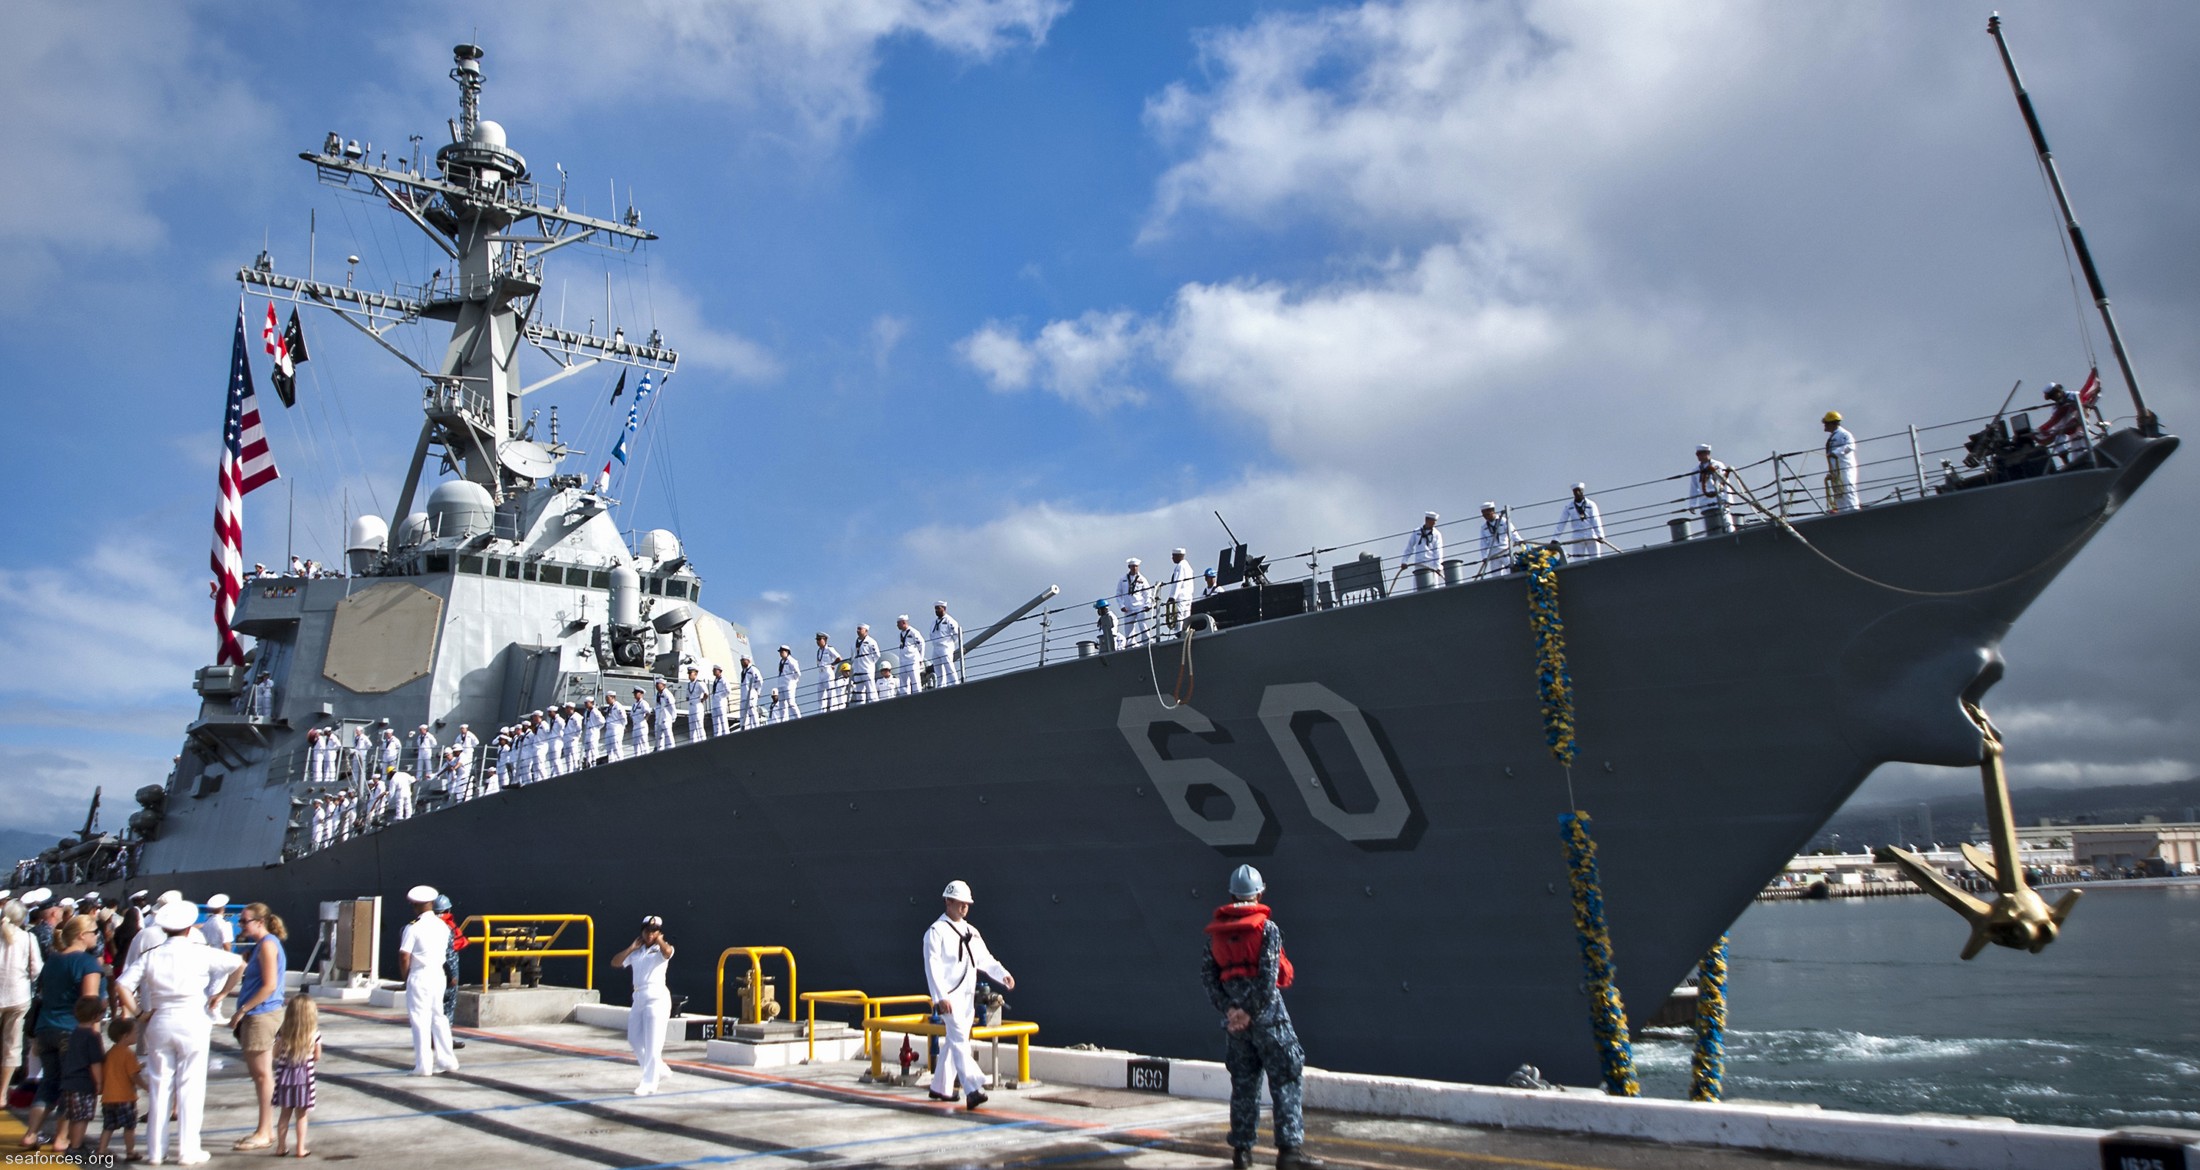 ddg-60 uss paul hamilton guided missile destroyer us navy 73